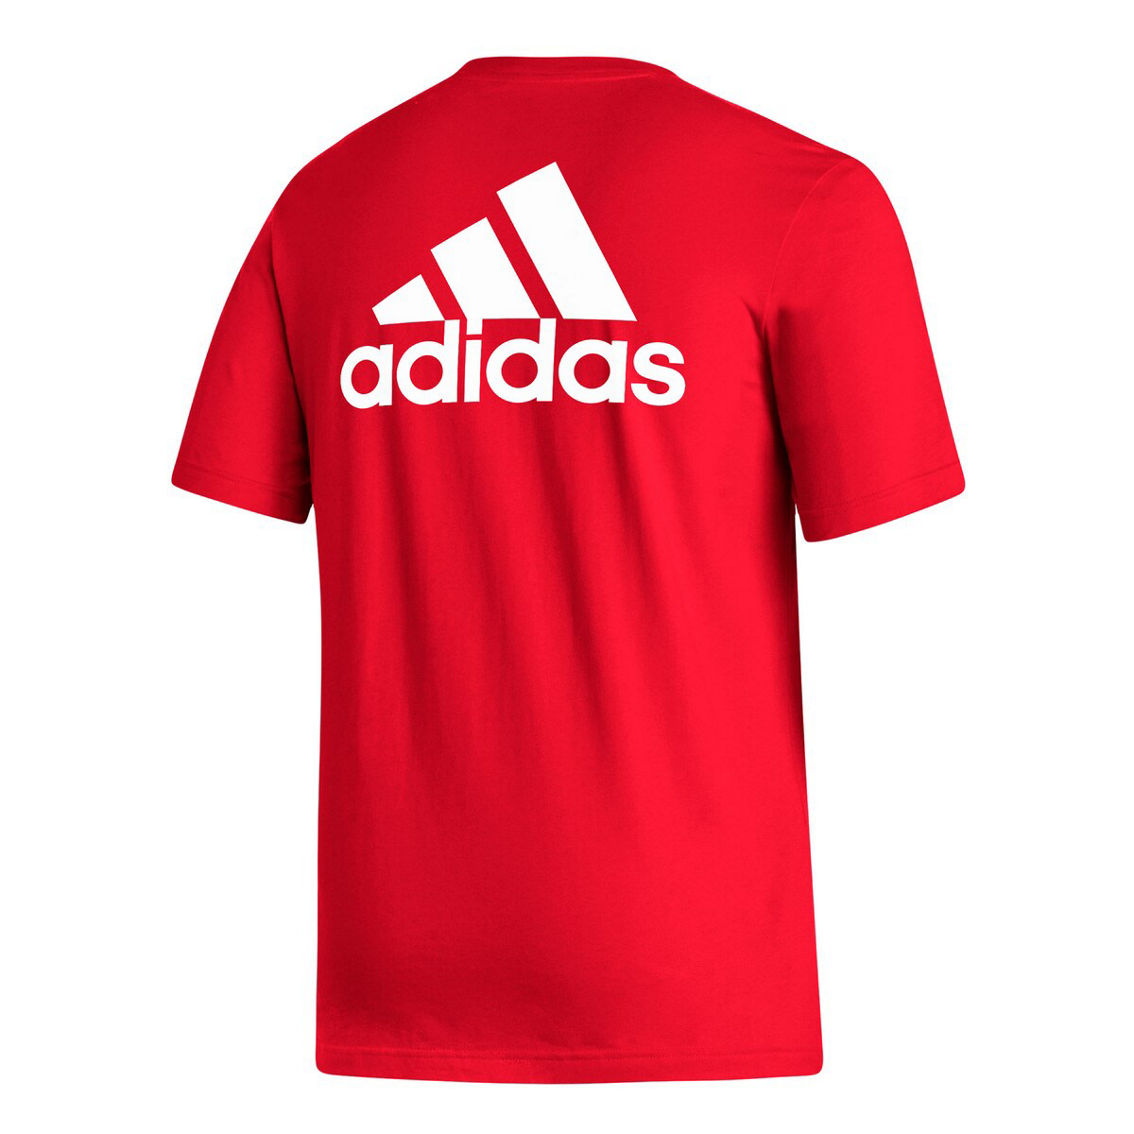 adidas Men's Red Arsenal Crest T-Shirt - Image 4 of 4